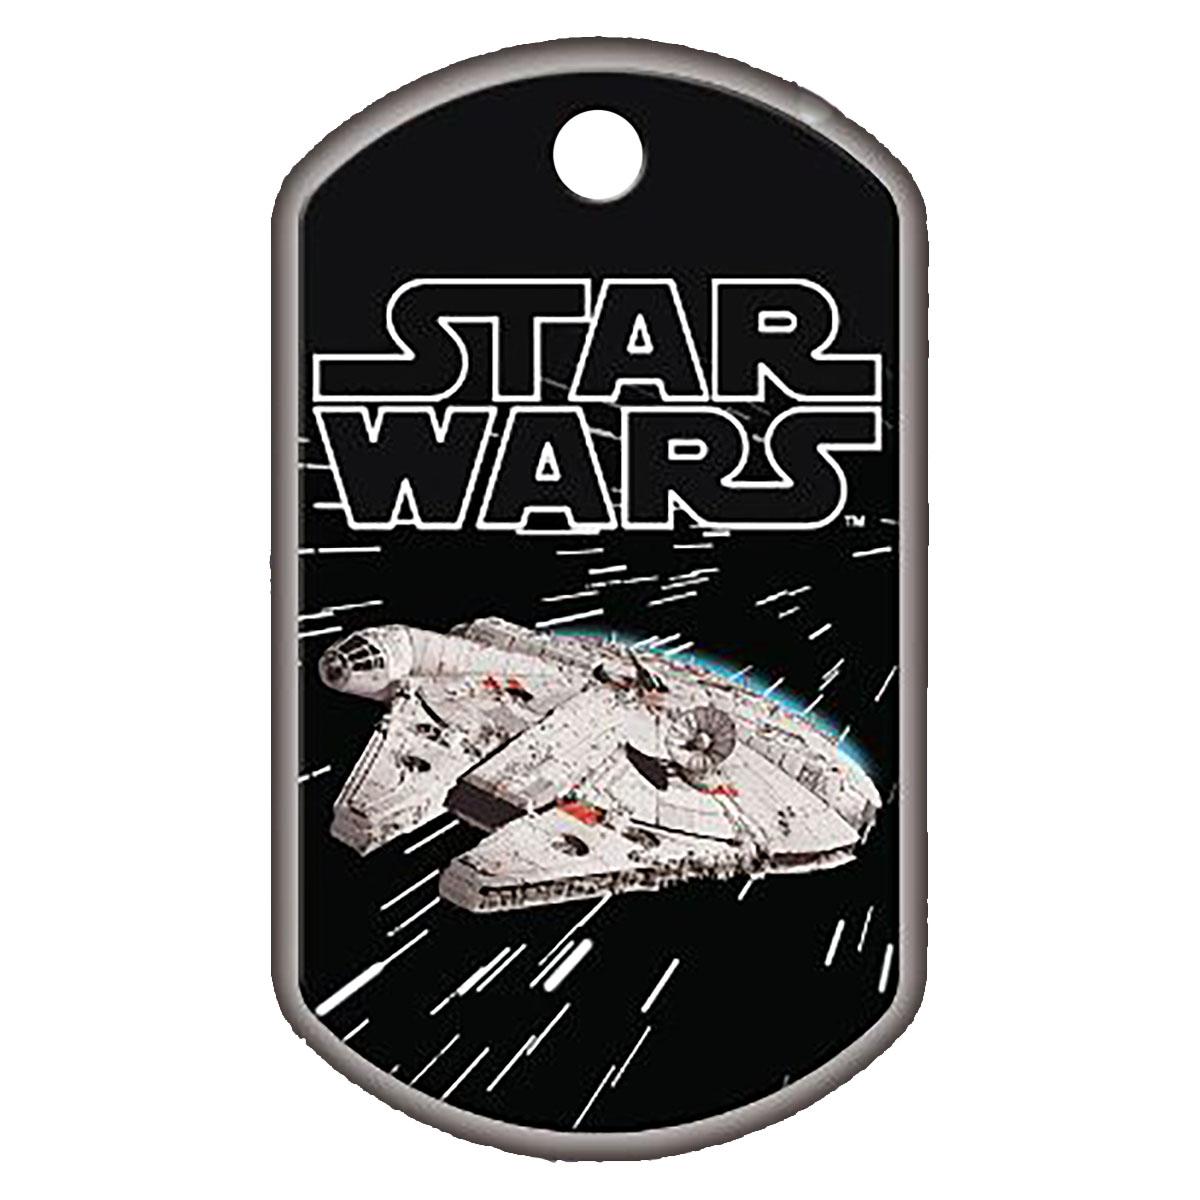 Soldier of the Empire Large Military Star Wars Pet ID Tag – Quick-Tag